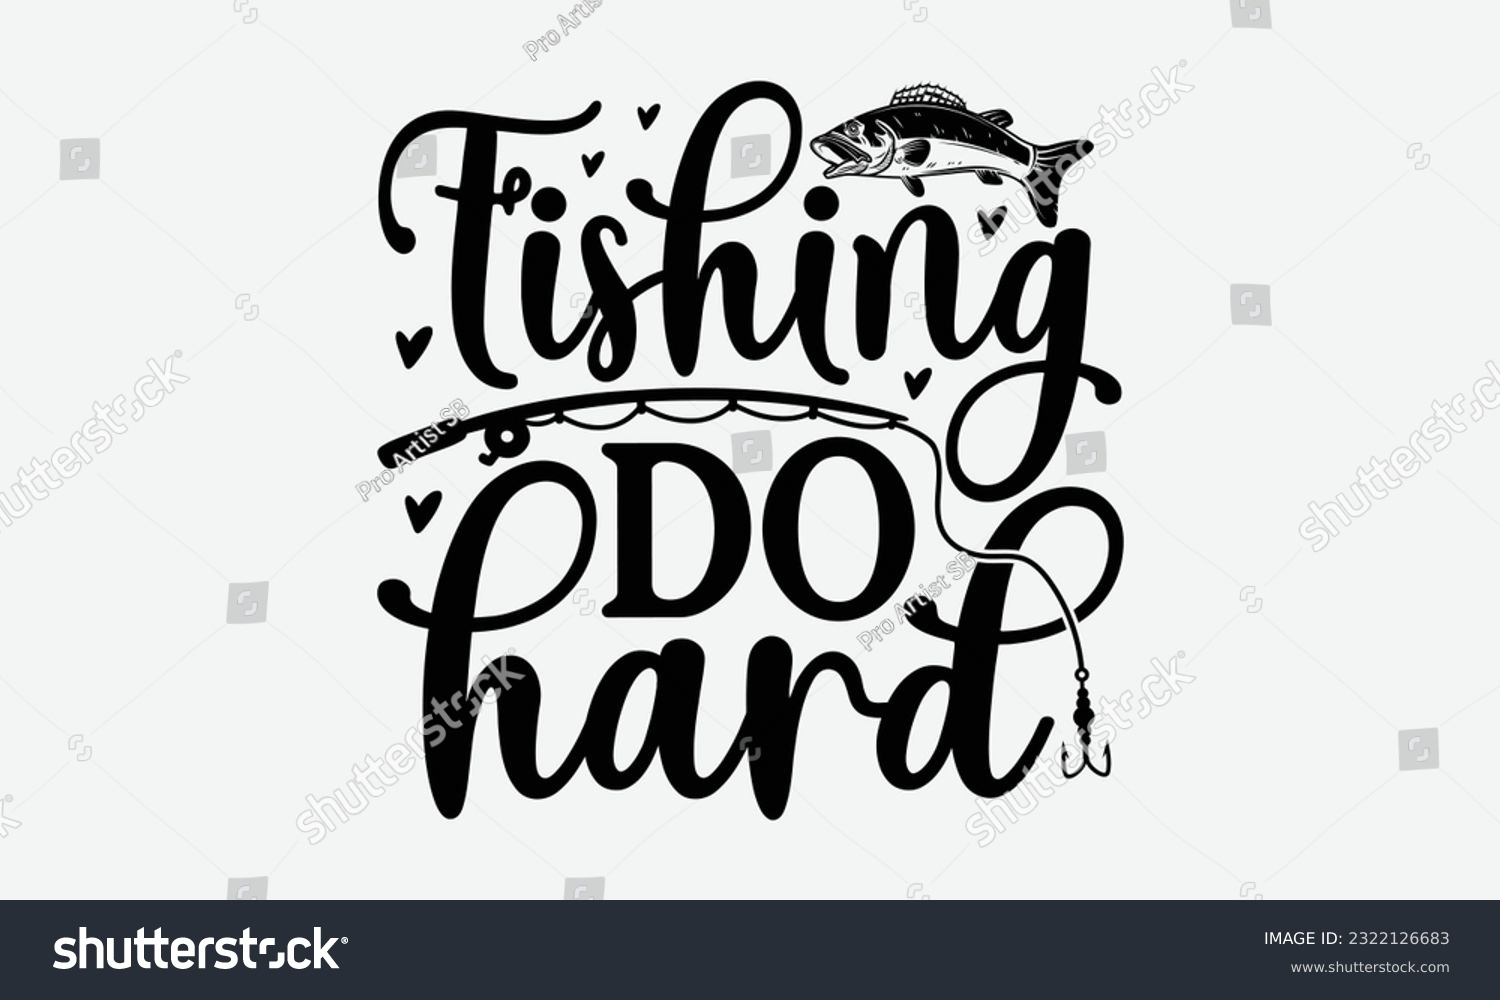 SVG of Fishing Do Hard - Fishing SVG Design, Fisherman Quotes, Hand Written Vector T-Shirt Design, For Prints on Mugs and Bags, Posters. svg